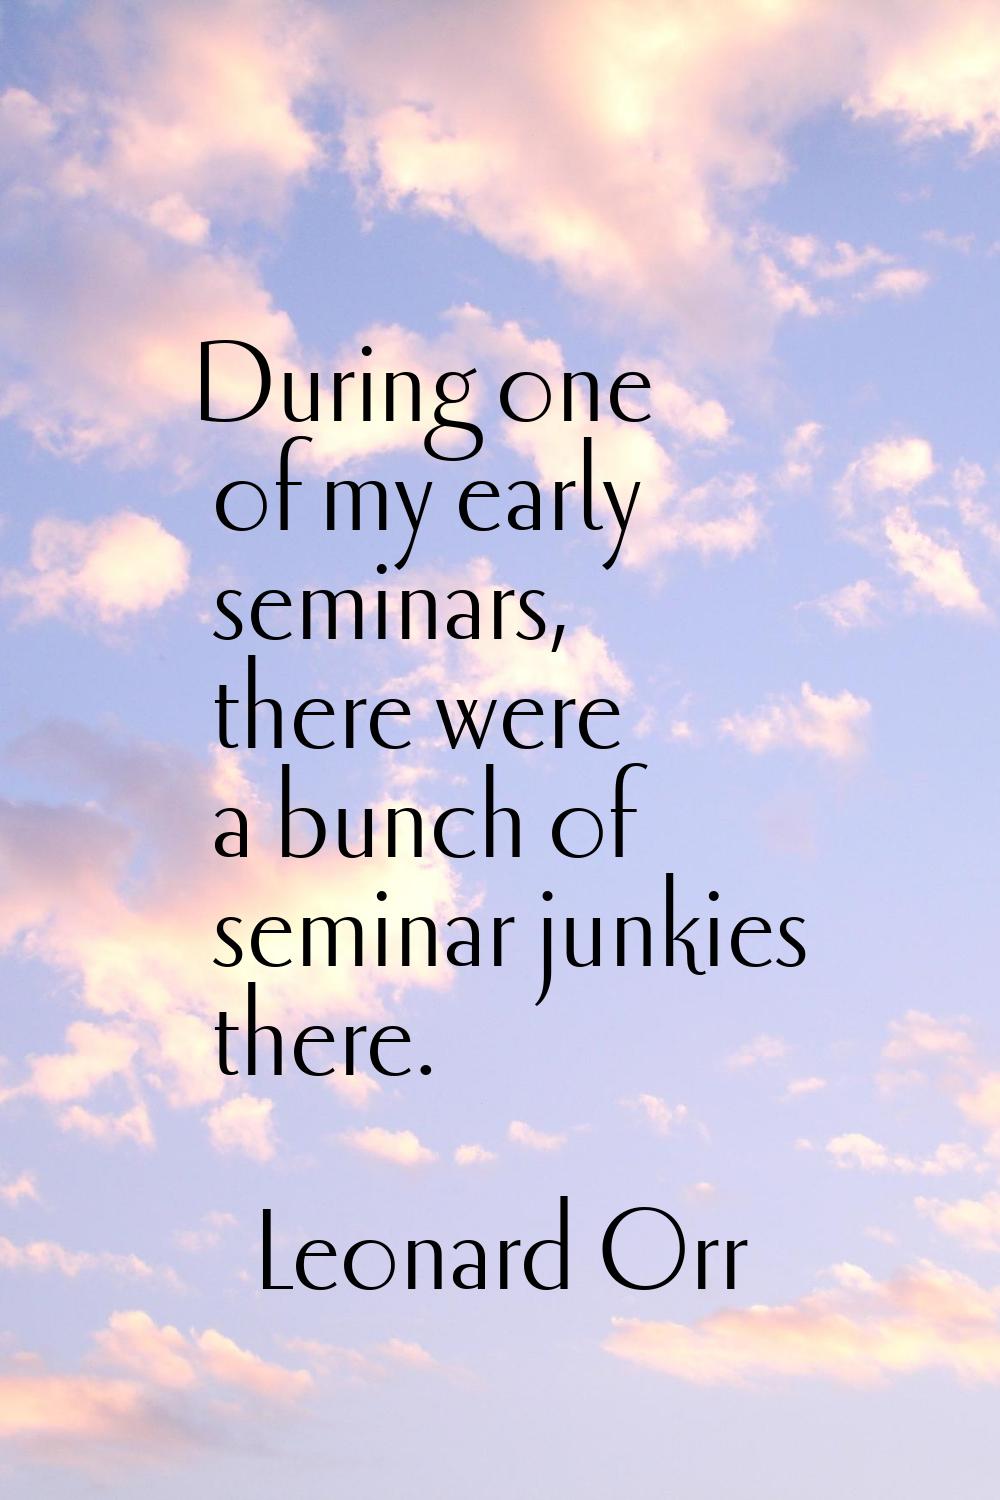 During one of my early seminars, there were a bunch of seminar junkies there.